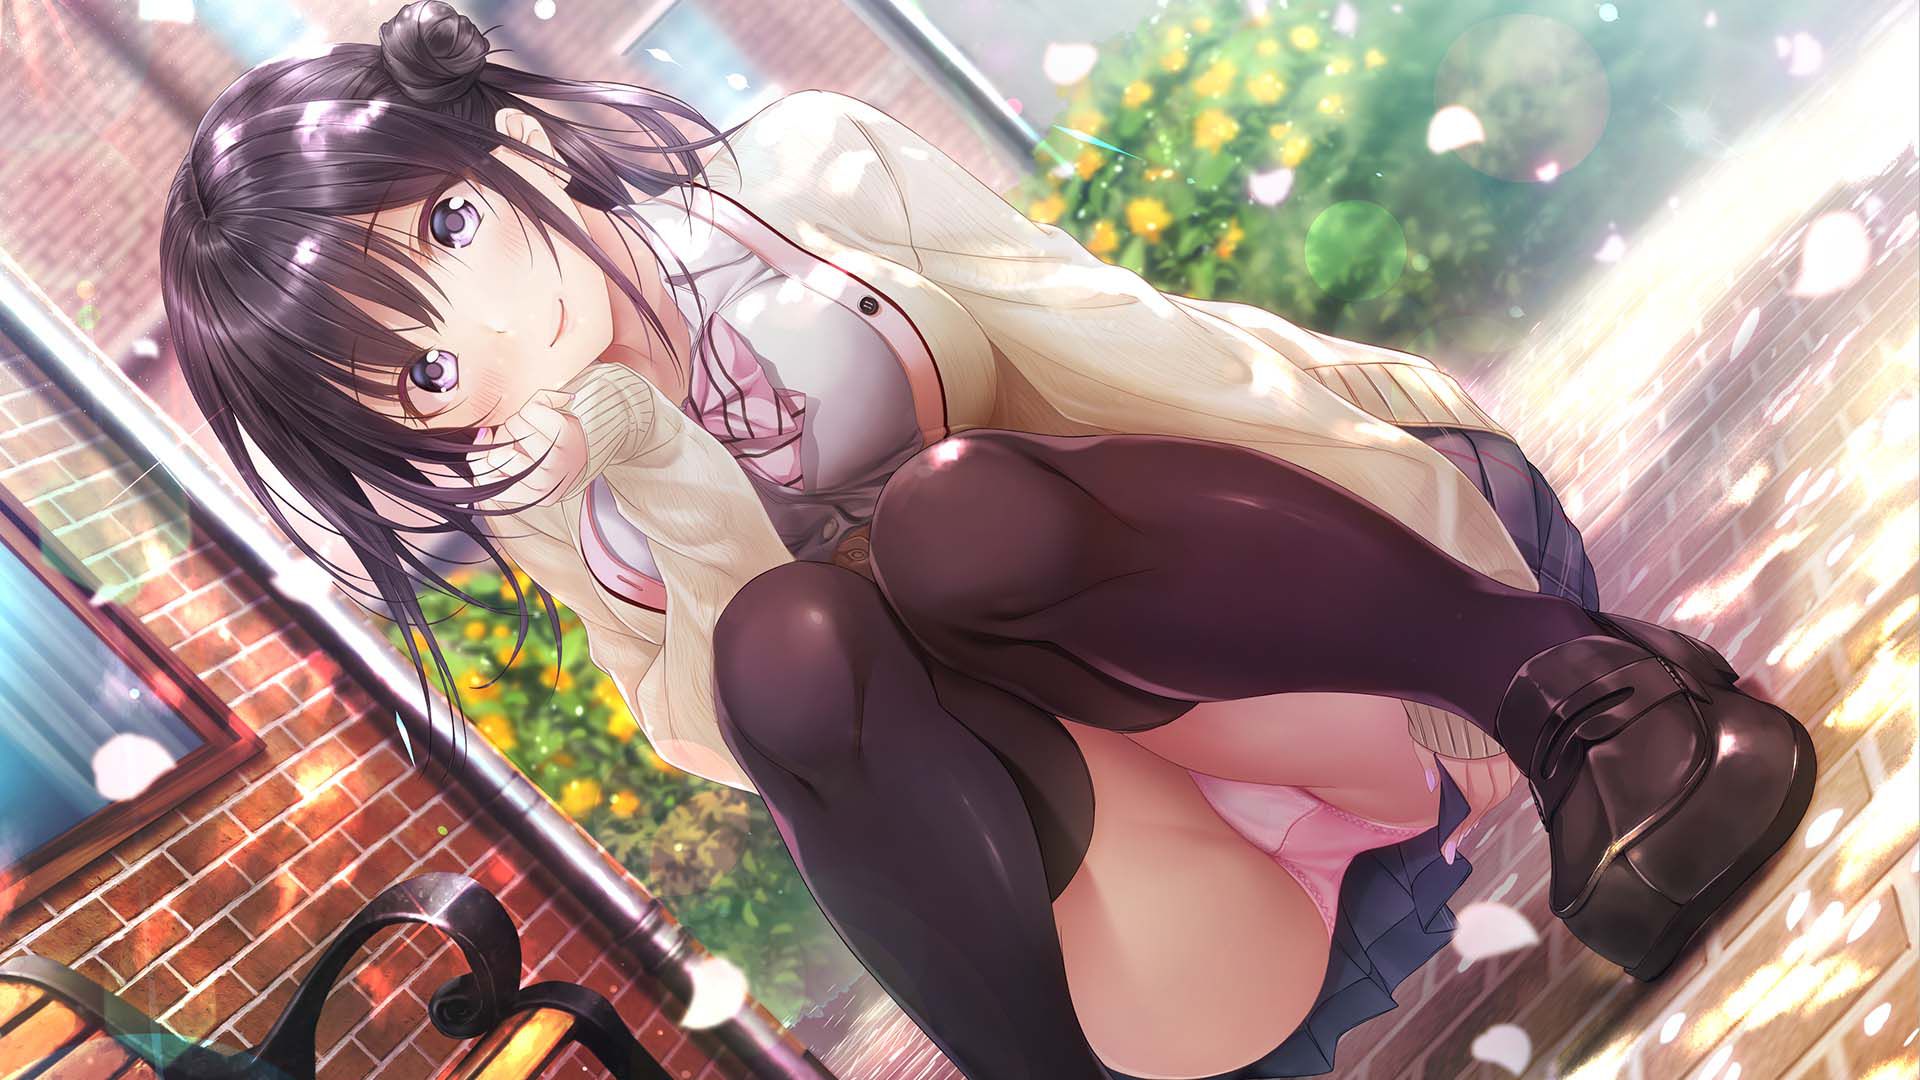 PS4 / Switch version "Aikiss 3 cute" Erotic event CG of boob whiplash swimsuit newly released! 2